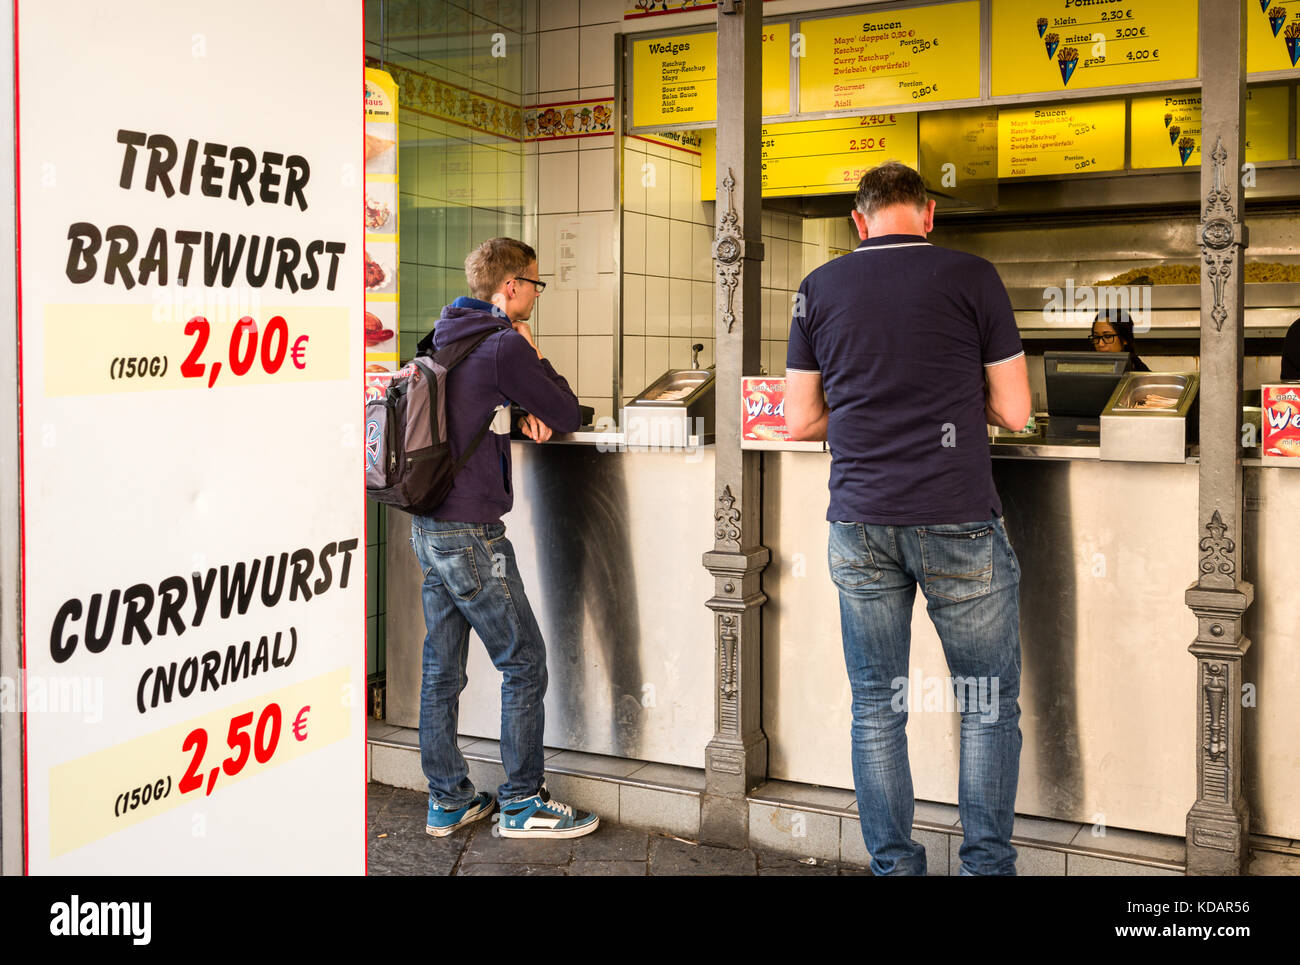 Bratwurst stand in Trier, Germany Stock Photo